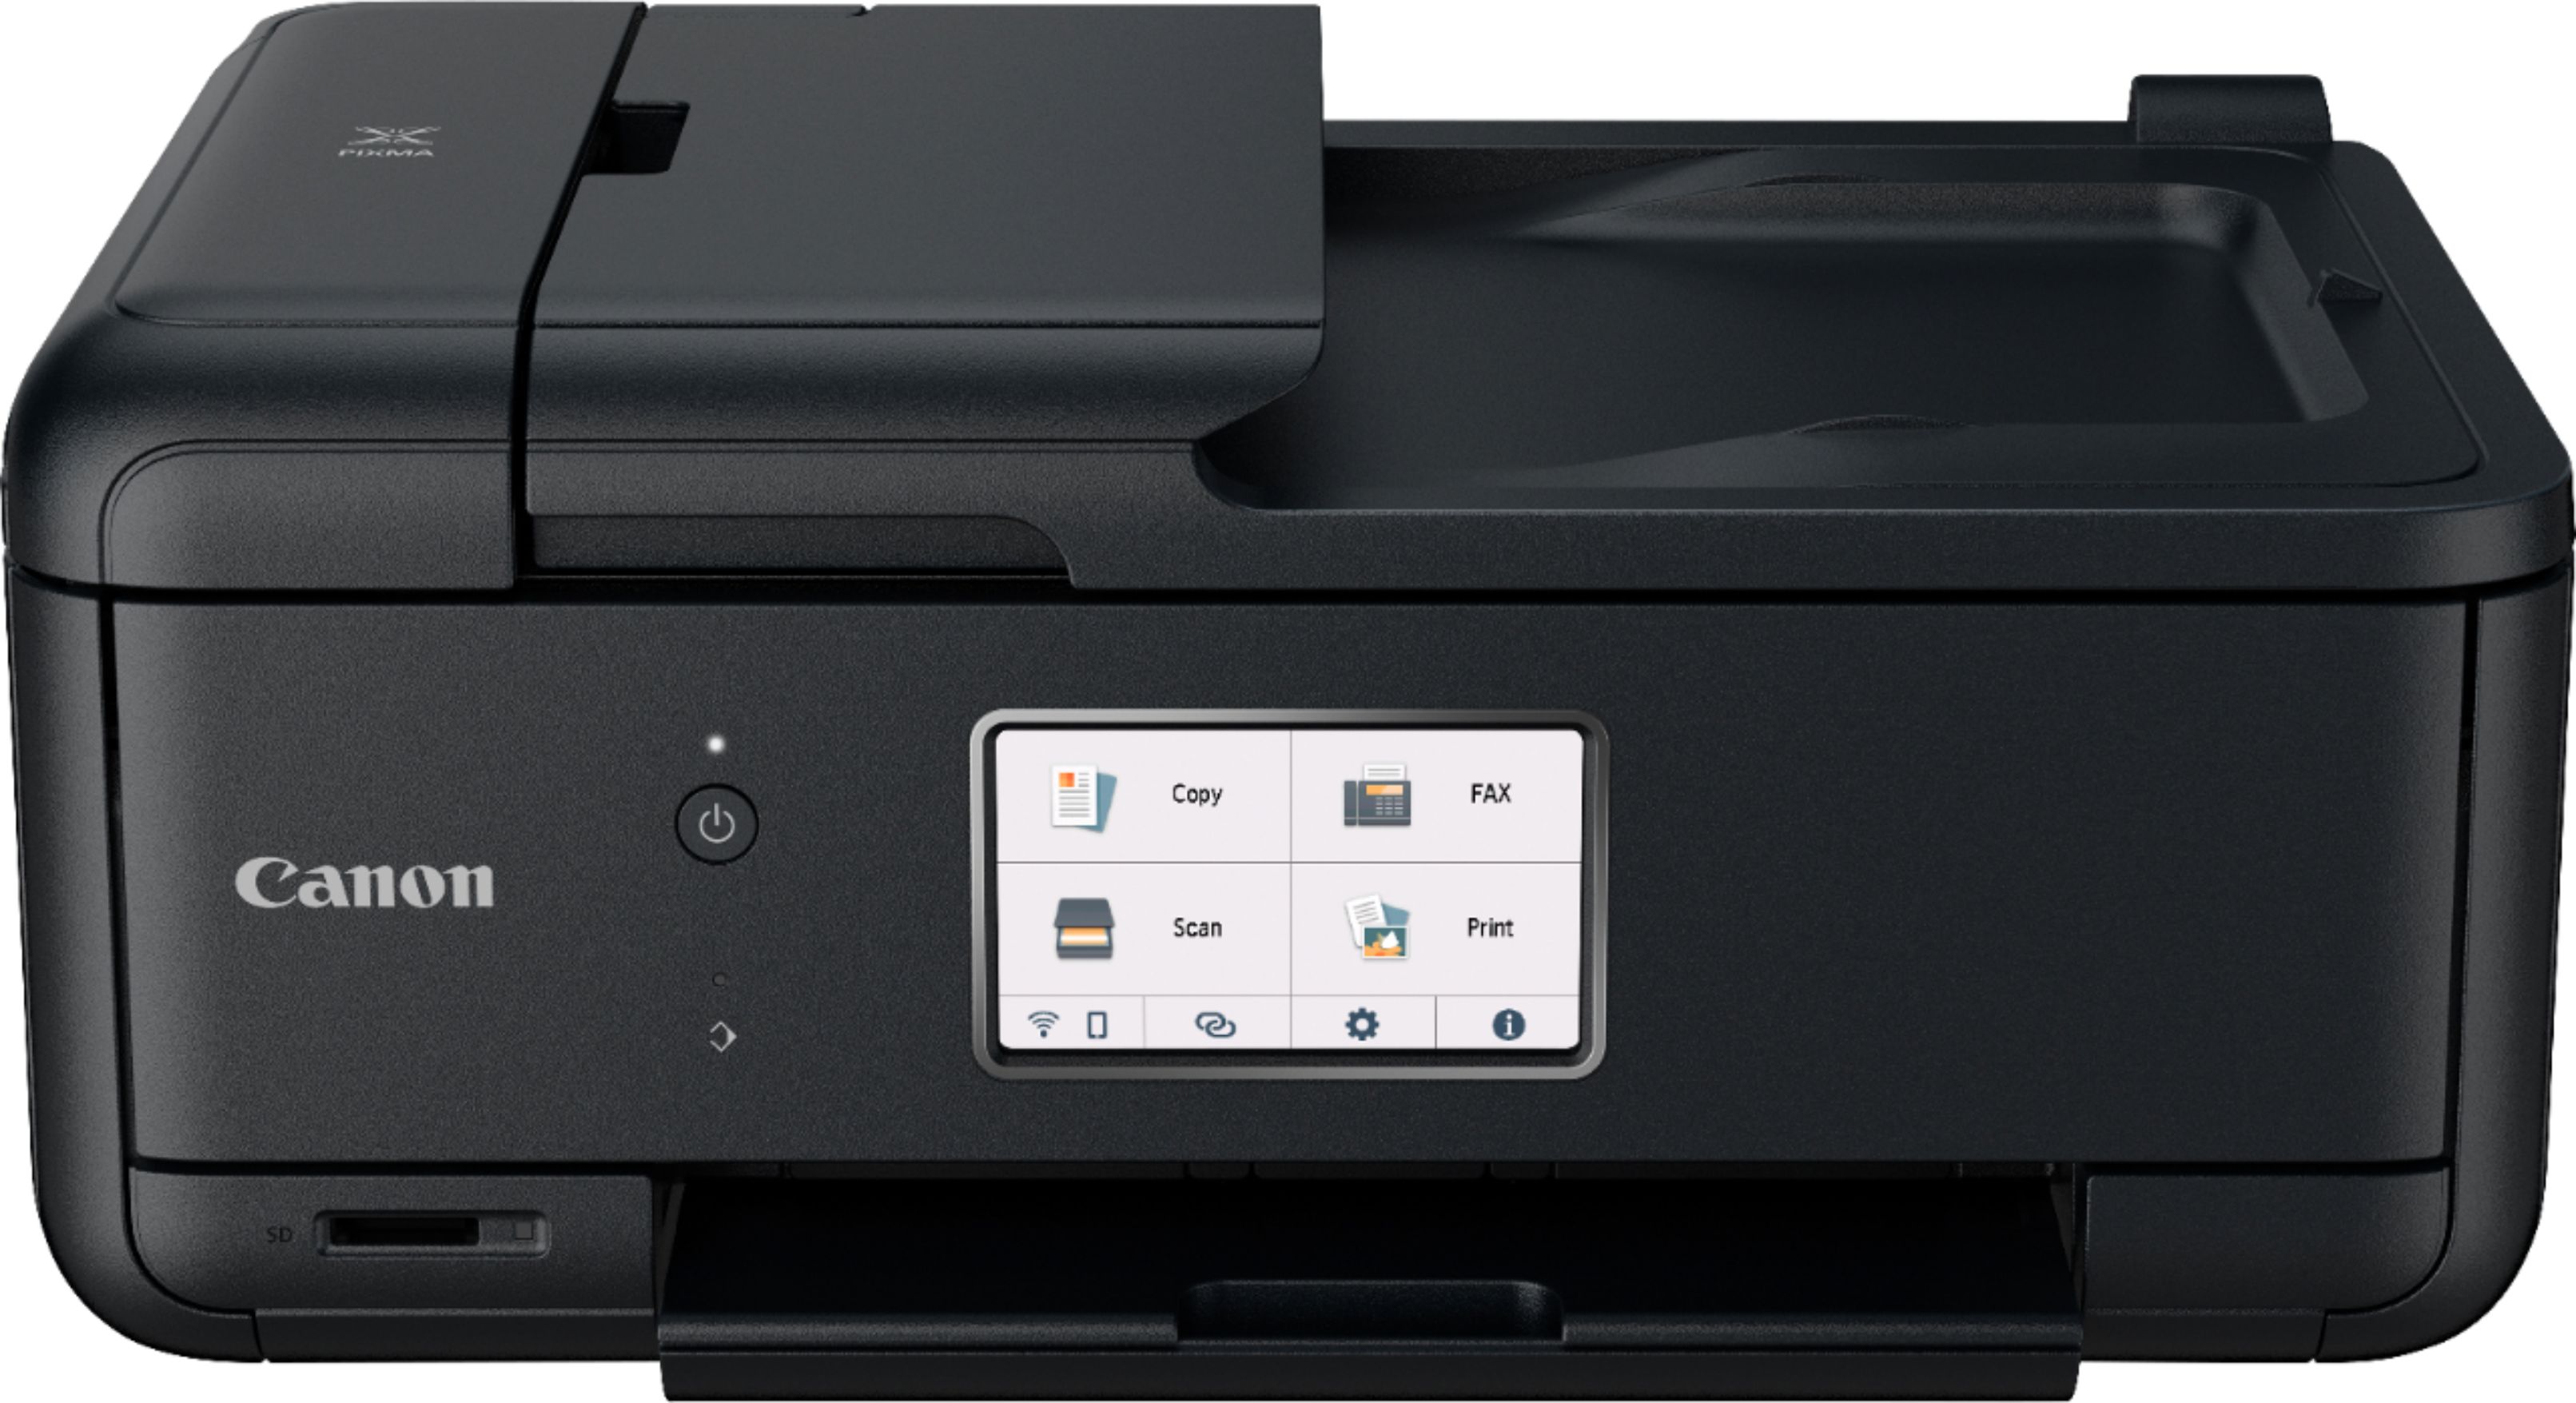 CLI8 Ink Cartridges compatible with Canon Pixma Printers YOU CHOOSE ANY 6 